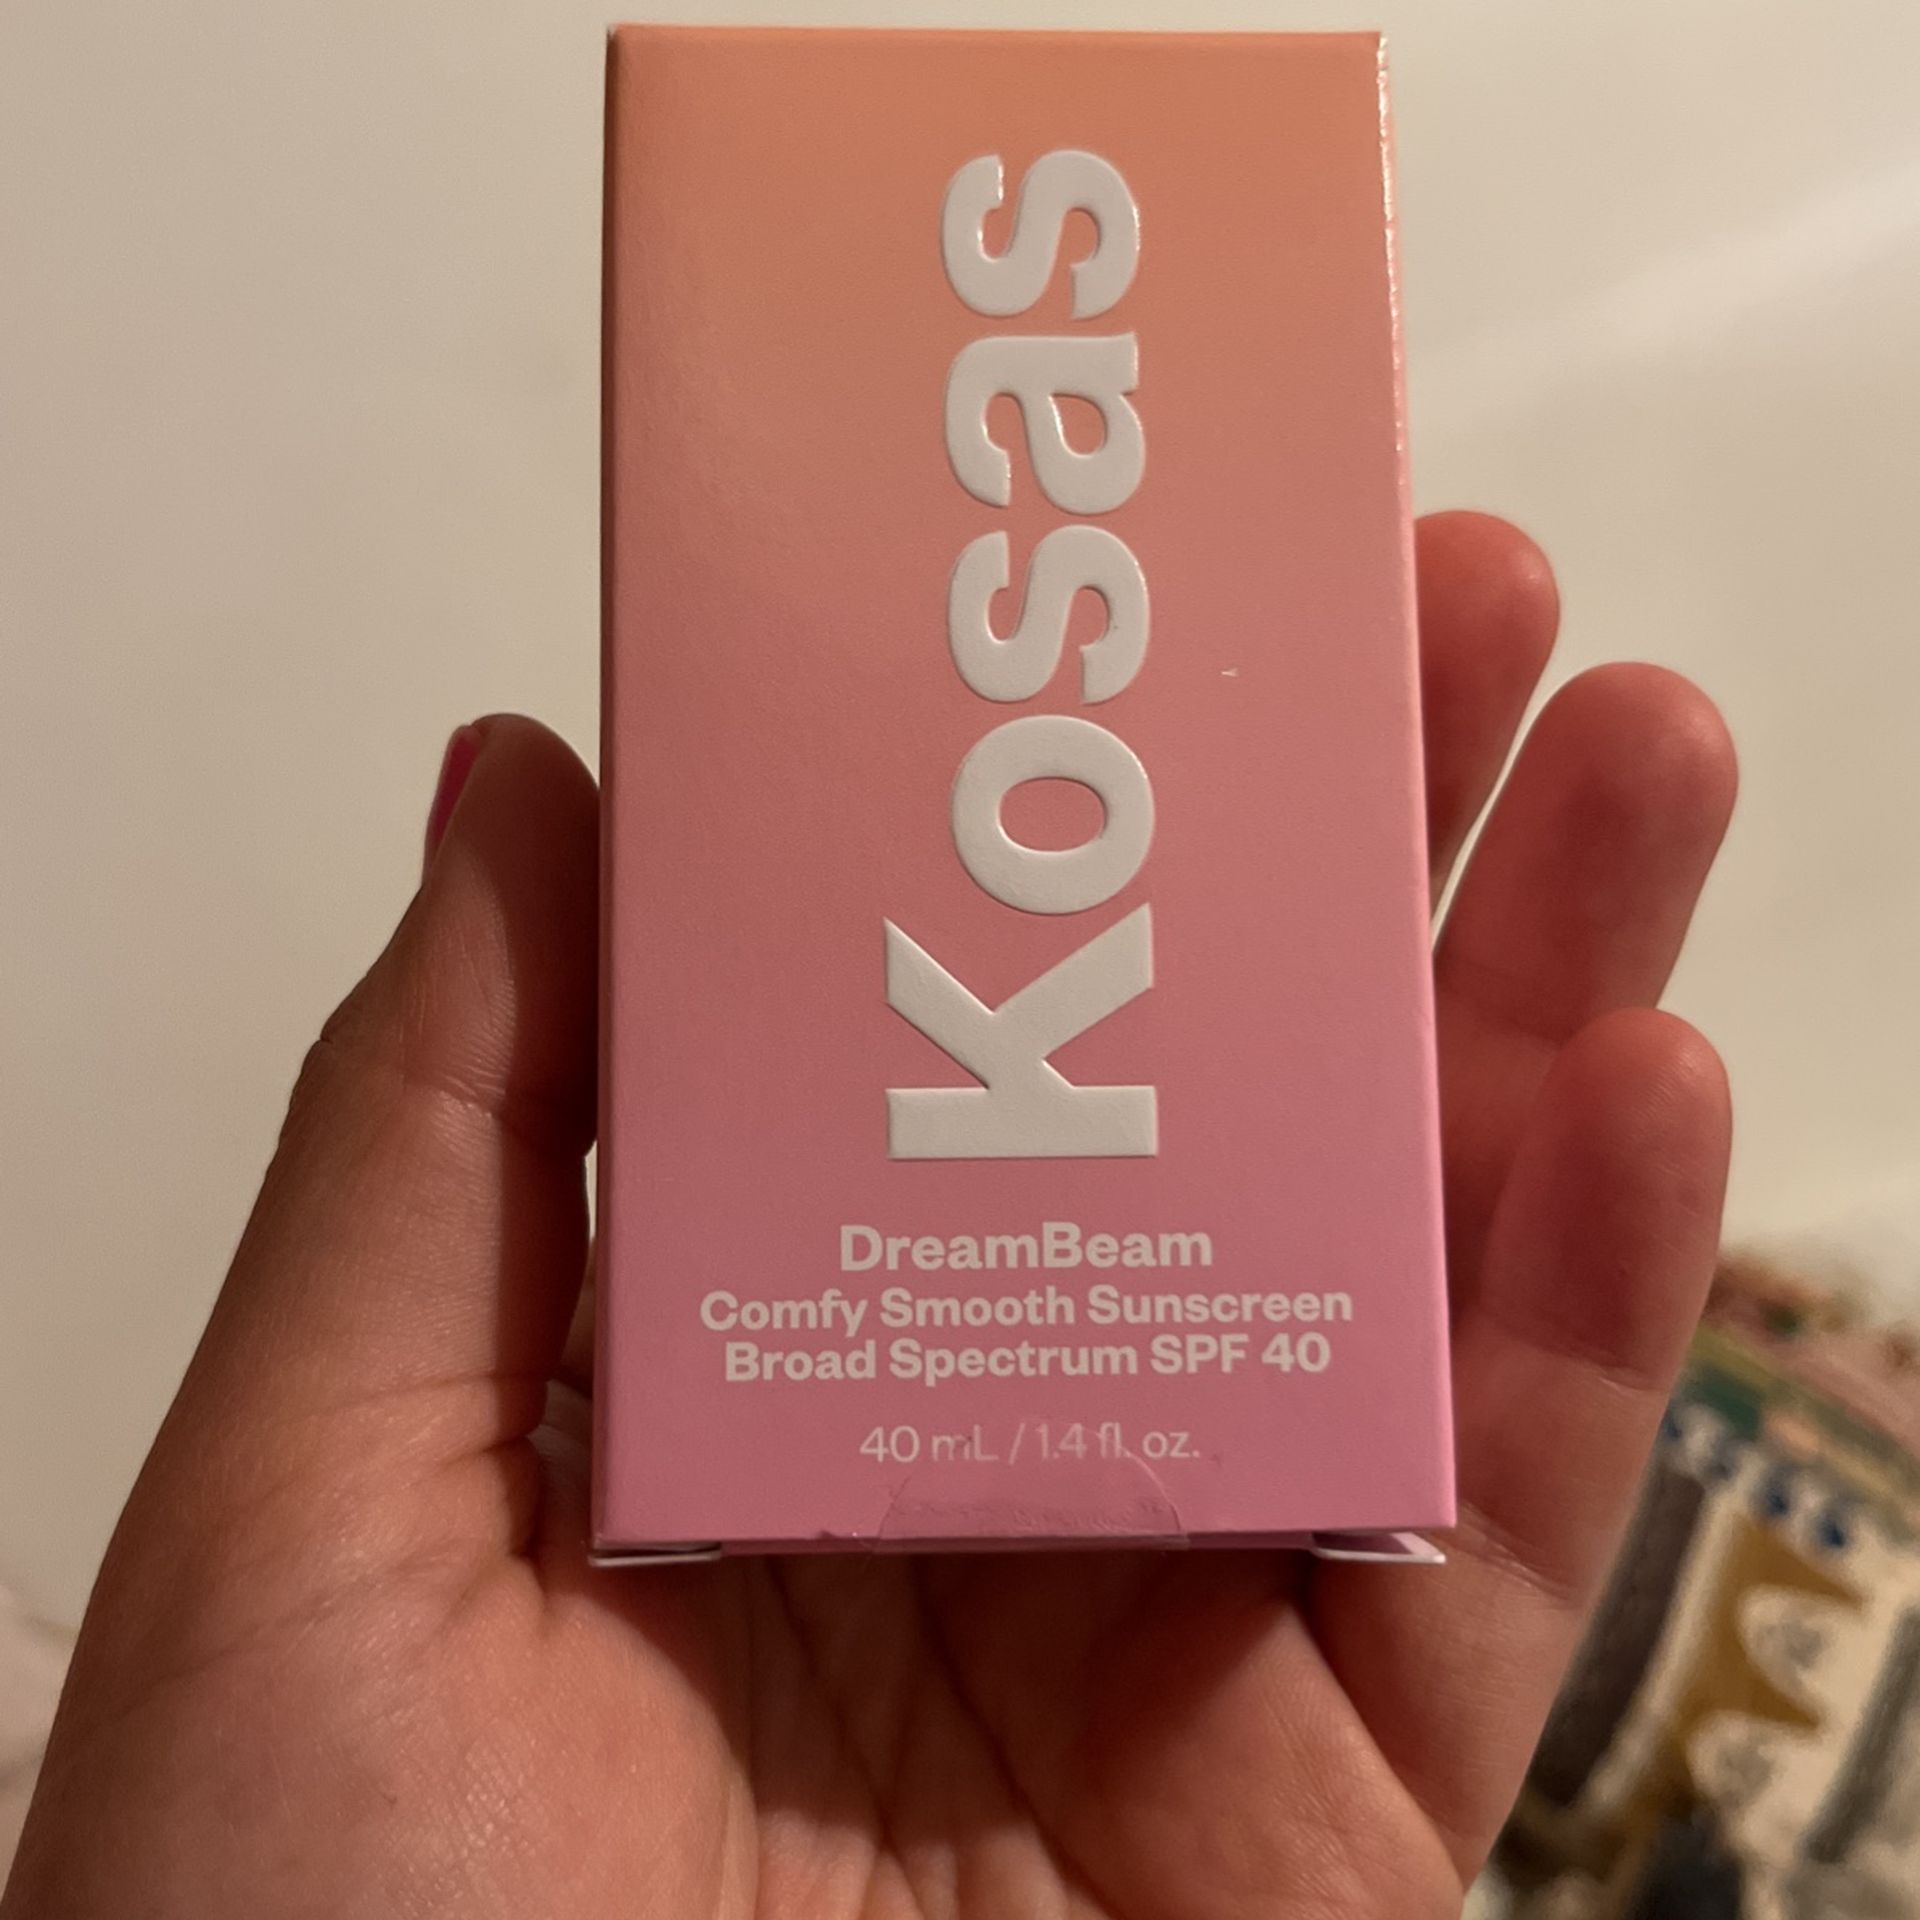 DreamBeam Silicone-Free Mineral Sunscreen SPF 40 with Ceramides and Peptides